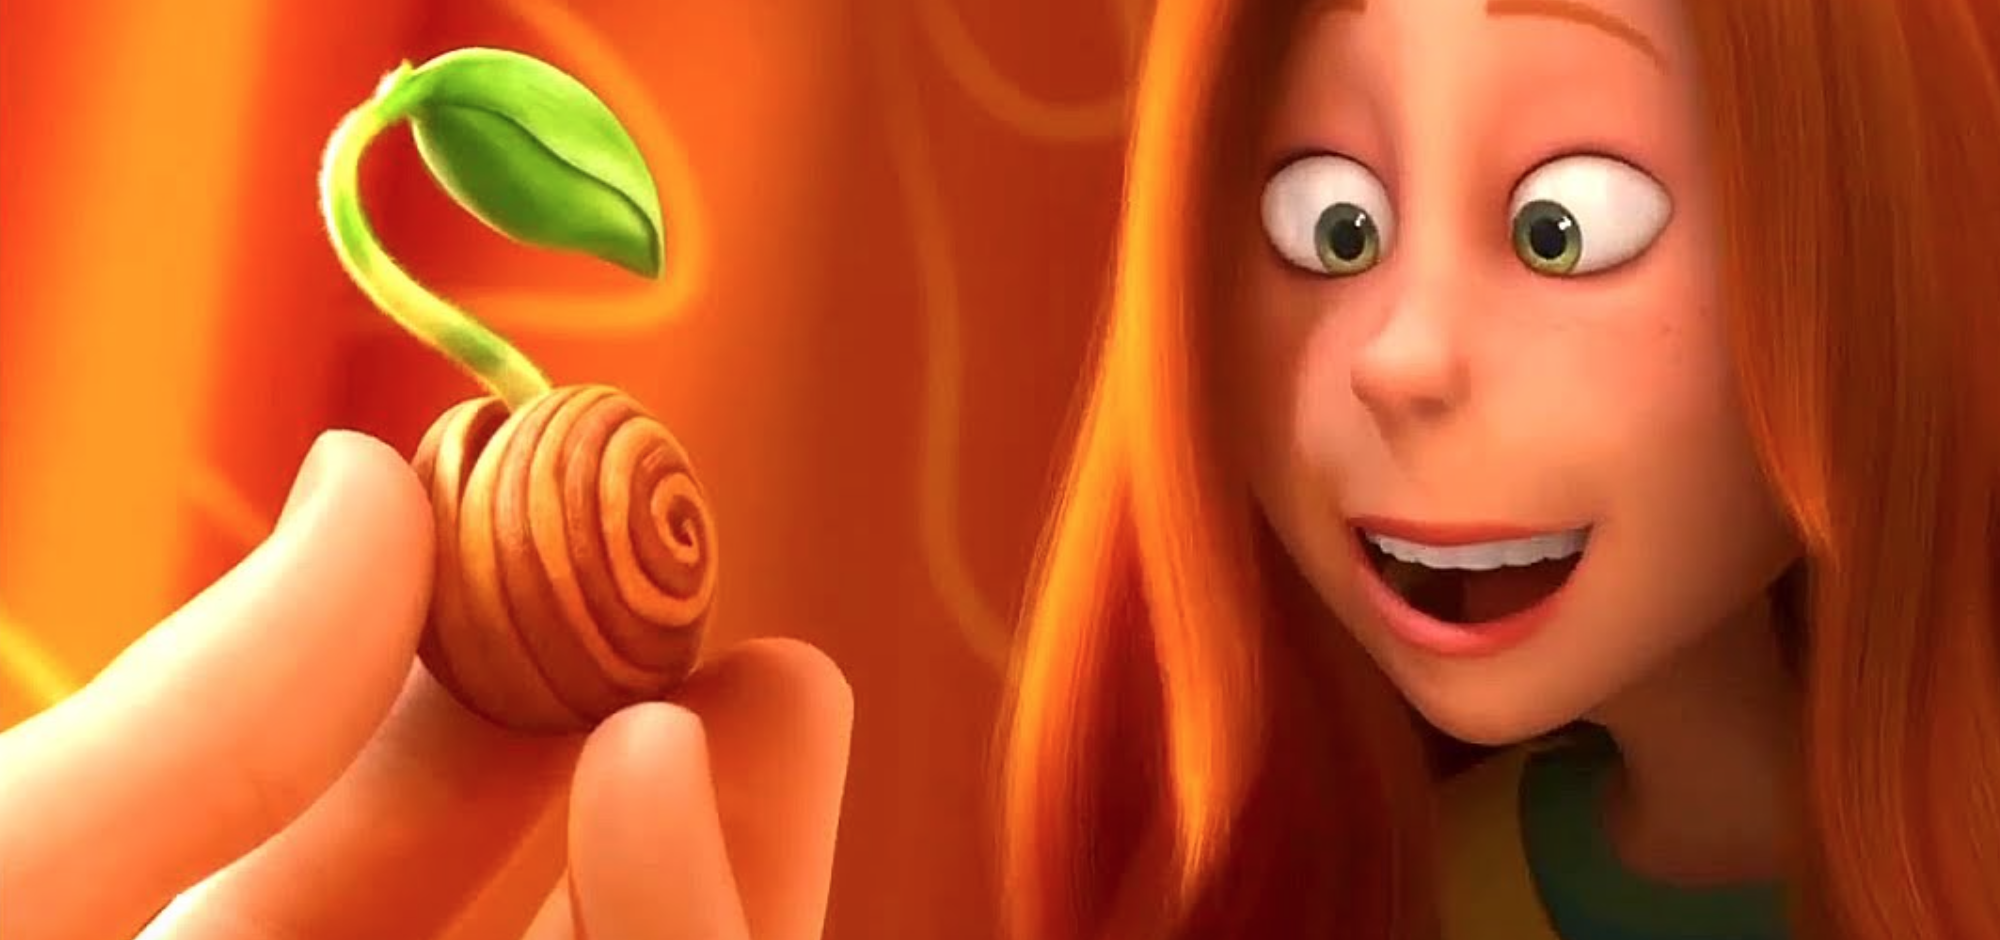 Children's Movies About Seeds and Plants that Get them Excited About  Sustainability